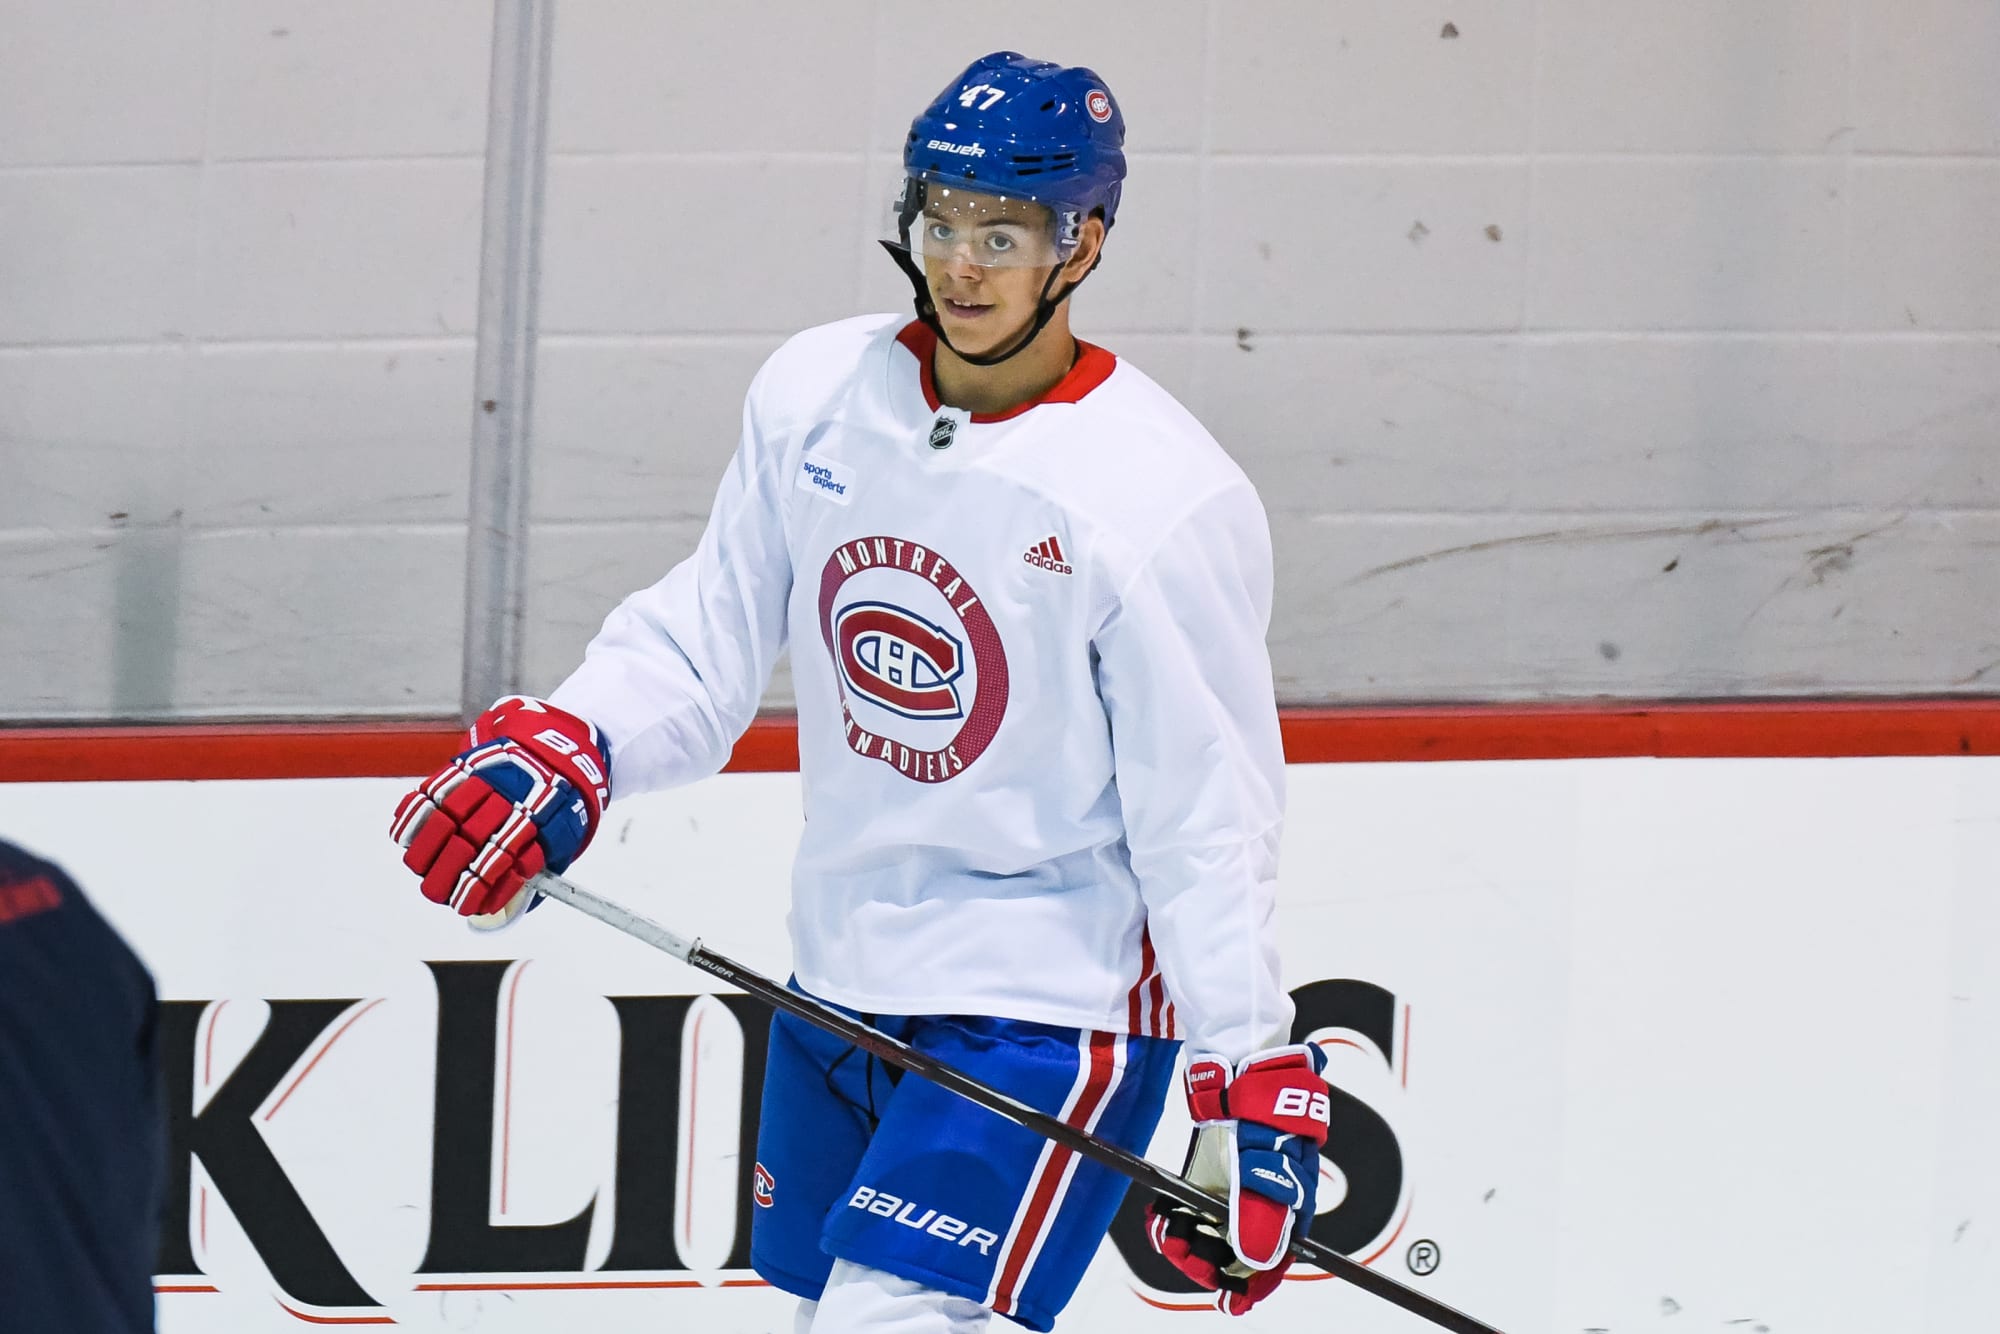 Montreal Canadiens: Signs point to a busy month for Jesperi Kotkaniemi